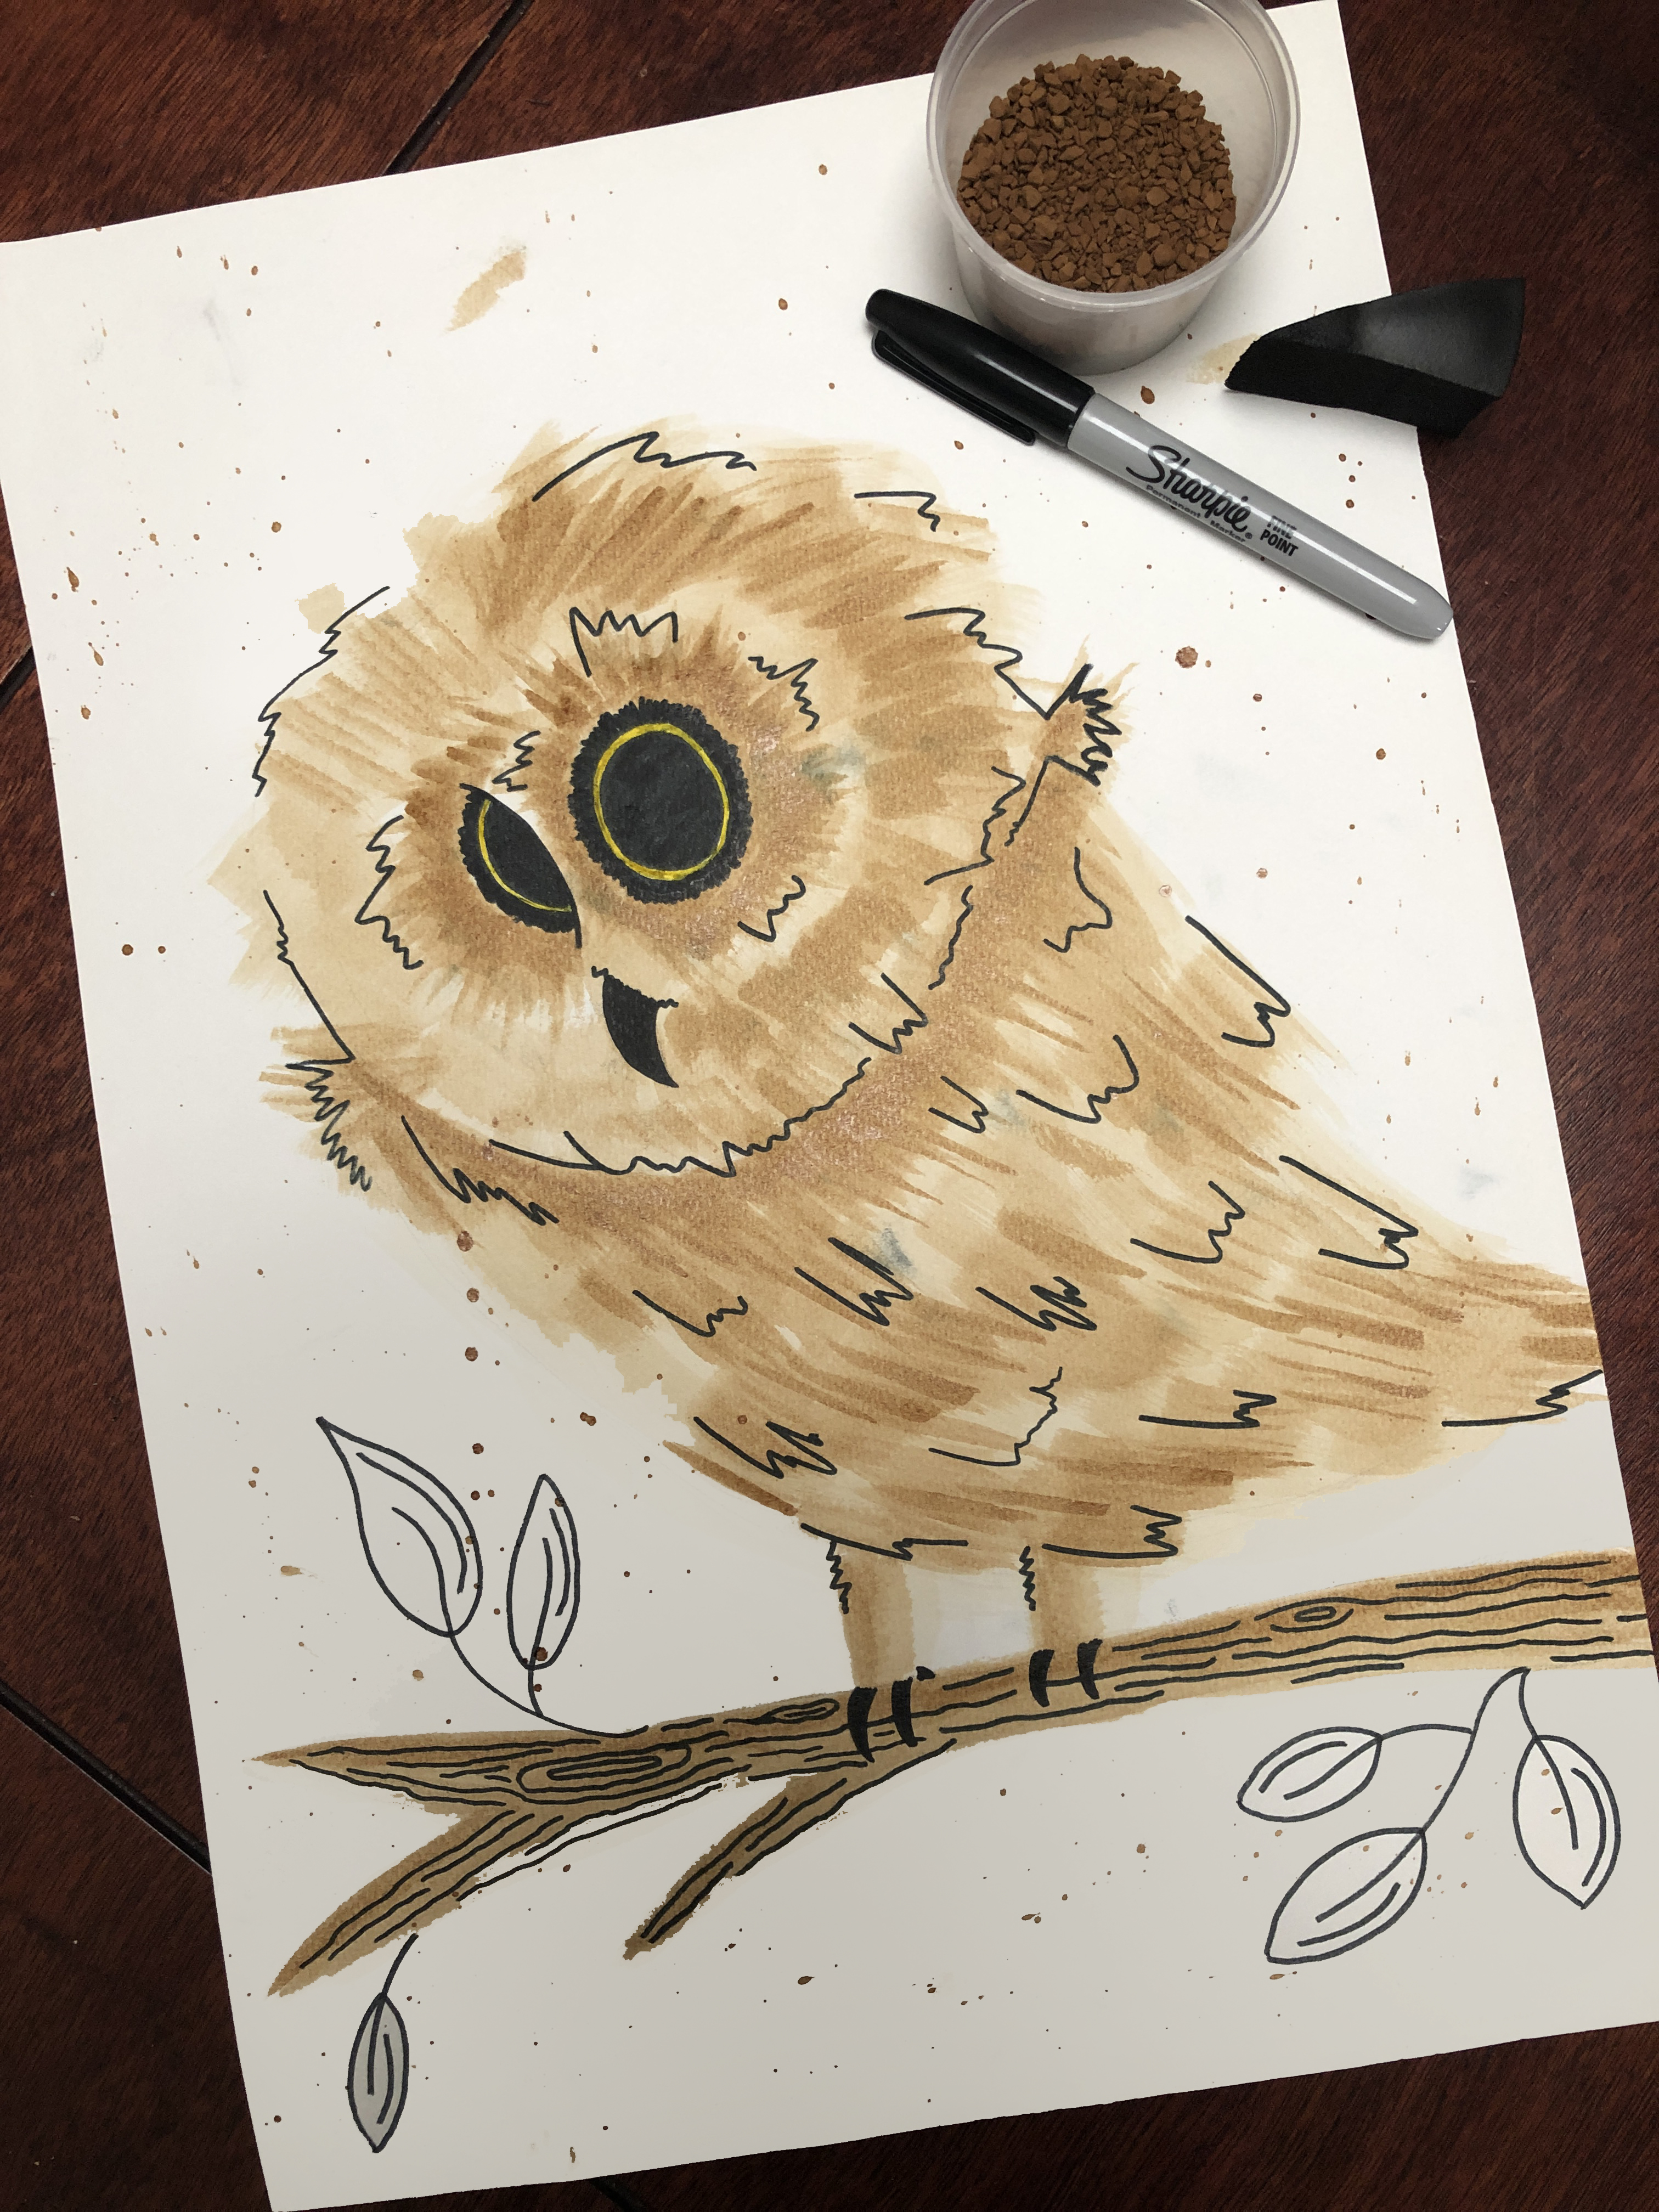 A Instant Owl  Instant Coffee  Sharpie experience project by Yaymaker